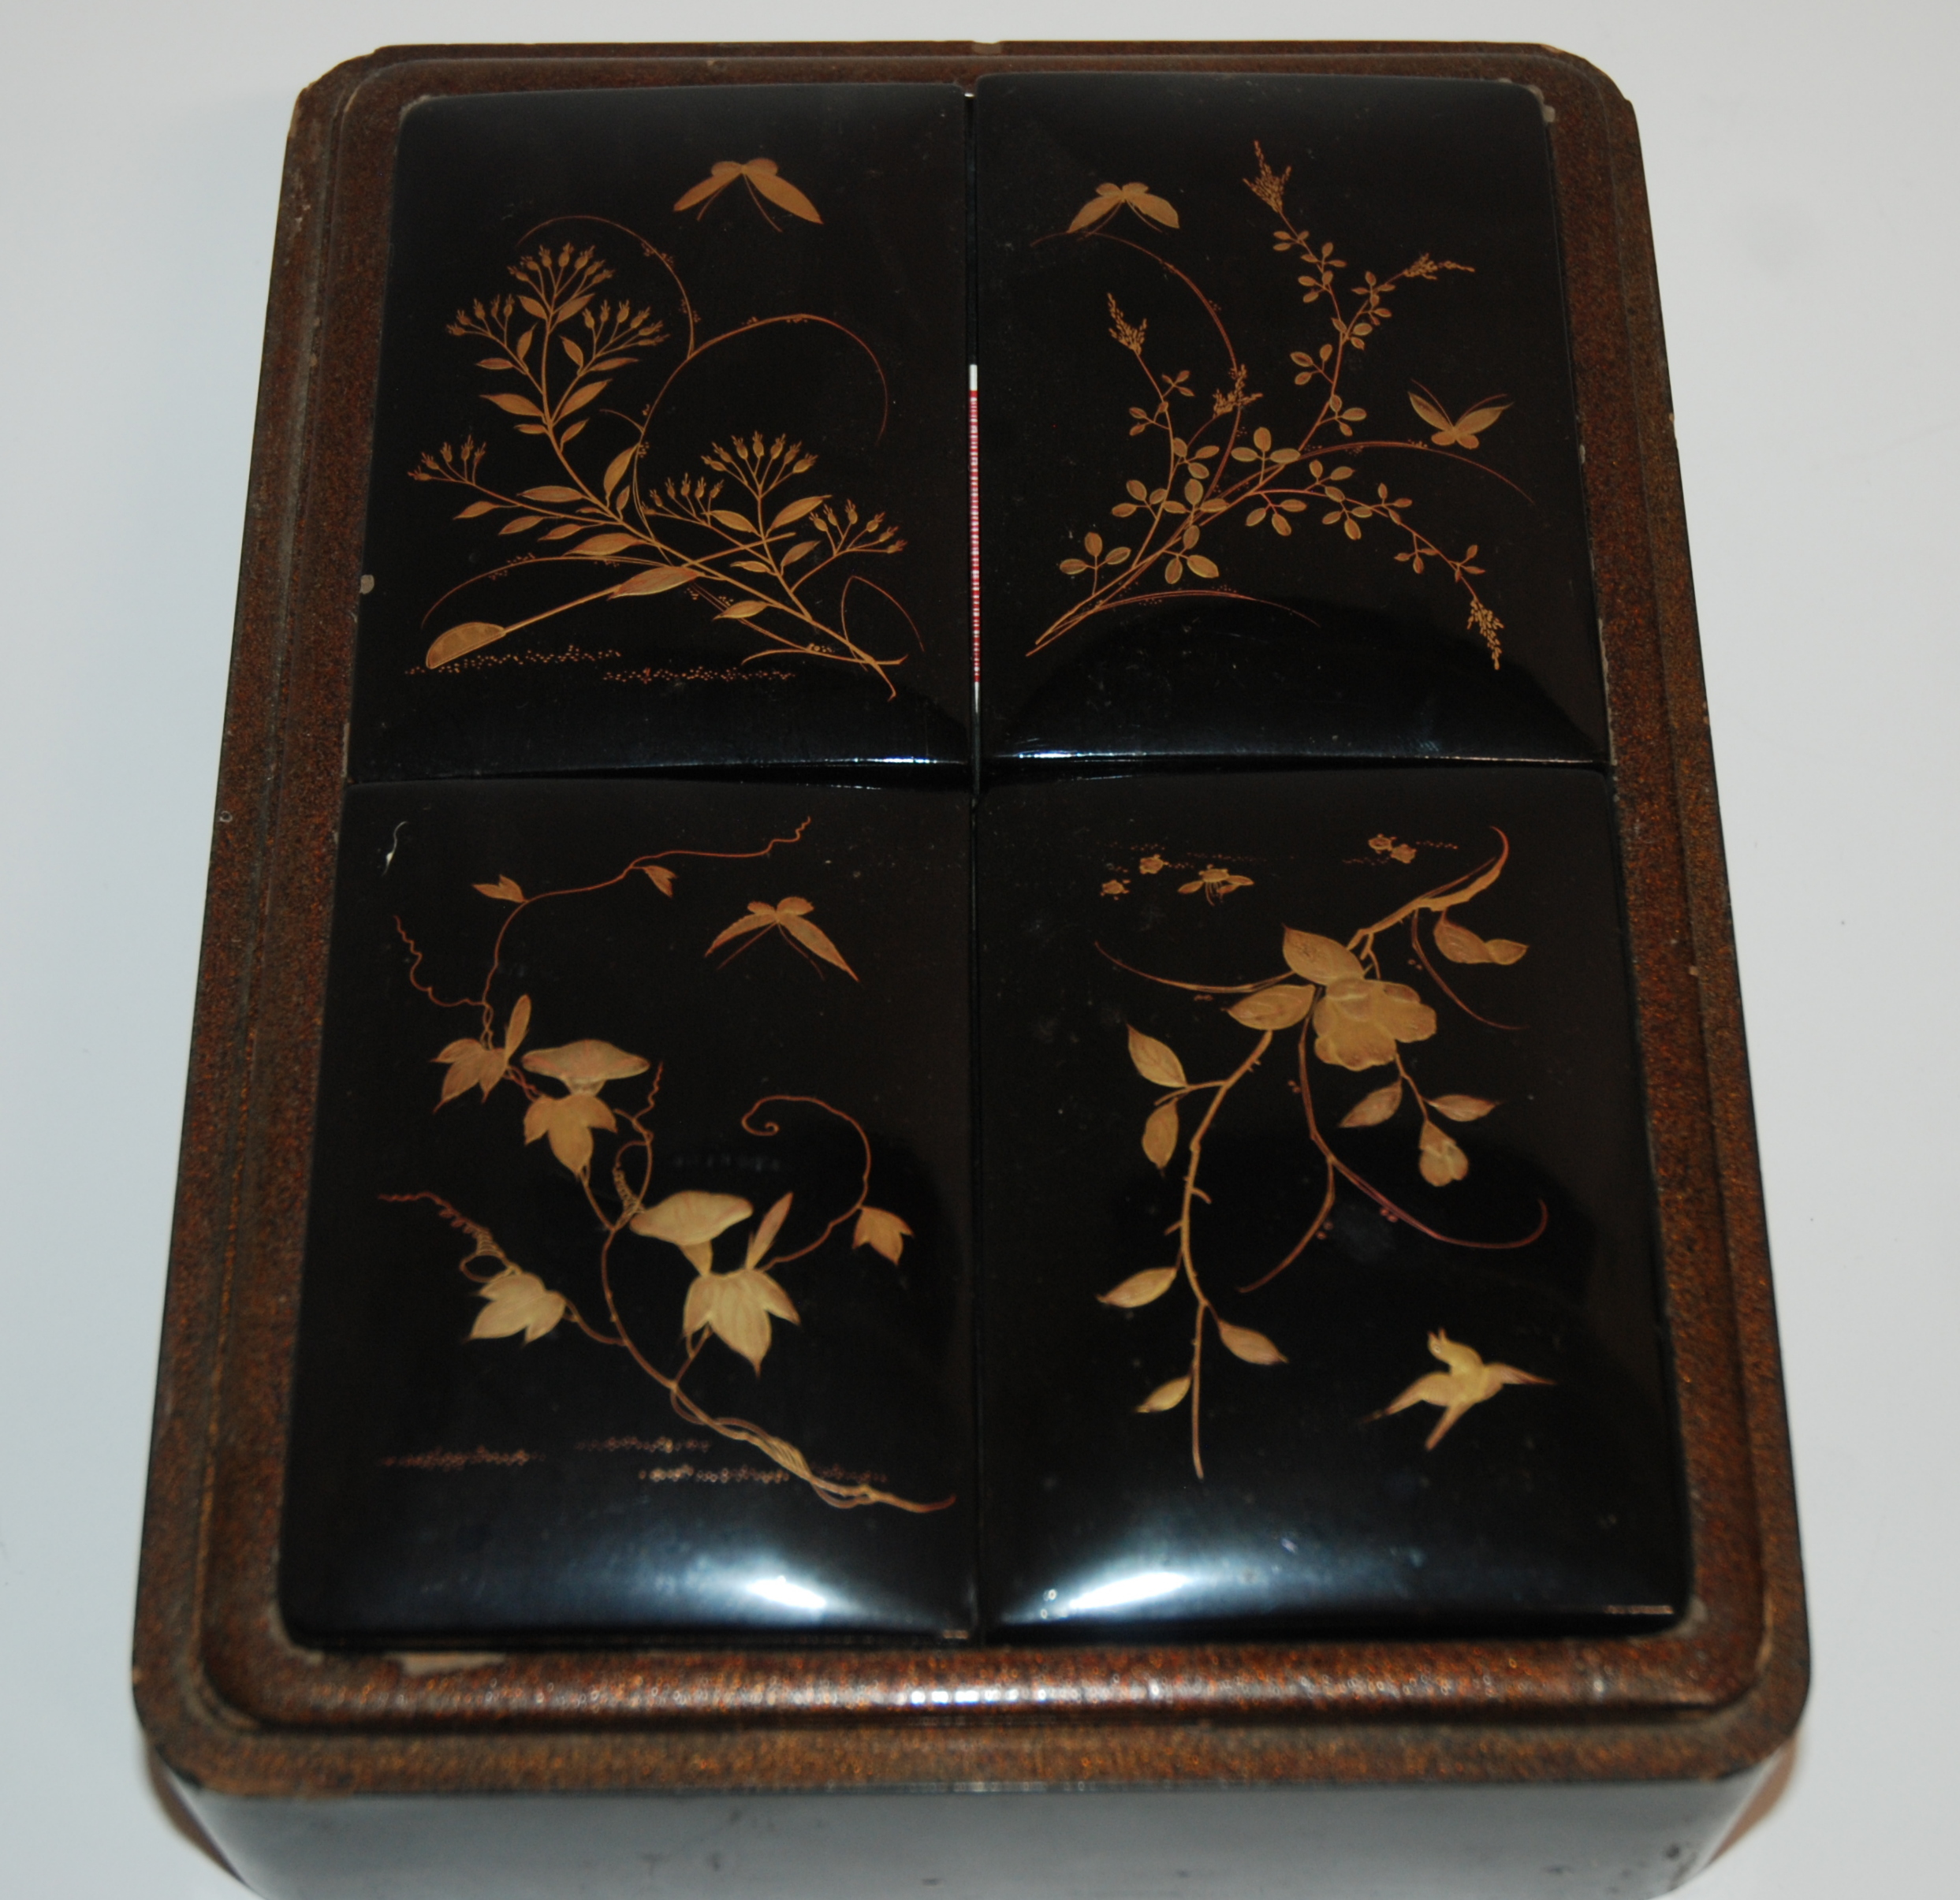 A CHINESE BLACK LACQUERED GAMES BOX the cover decorated with birds and flowers in a river landscape, - Image 7 of 9